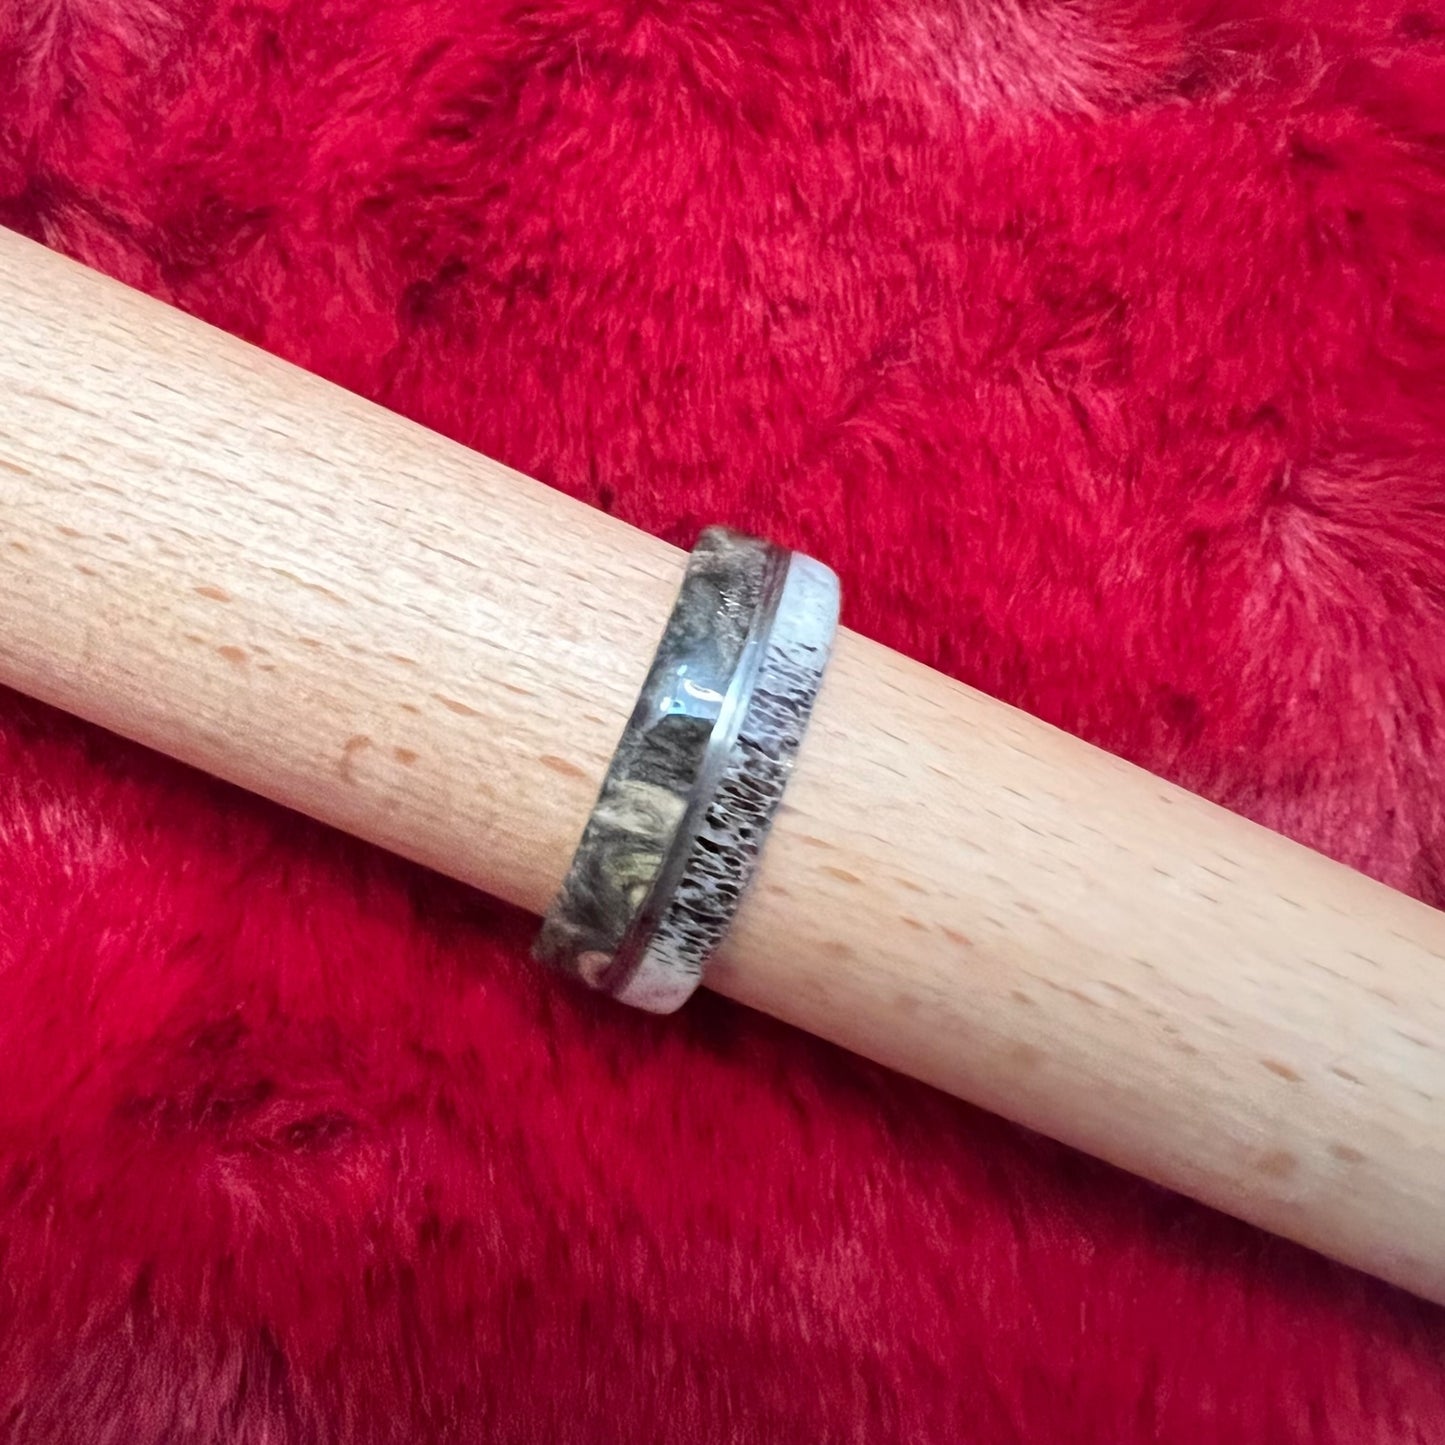 Genuine Stag and Buckeye Burl/ Titanium band  Comfort Fit with Brushed Finish Fast Shipping One Year Warranty Hand Crafted Easy to Care for These beautiful 8mm rings are hand crafted to order and shipped directly from our shop here in the USA